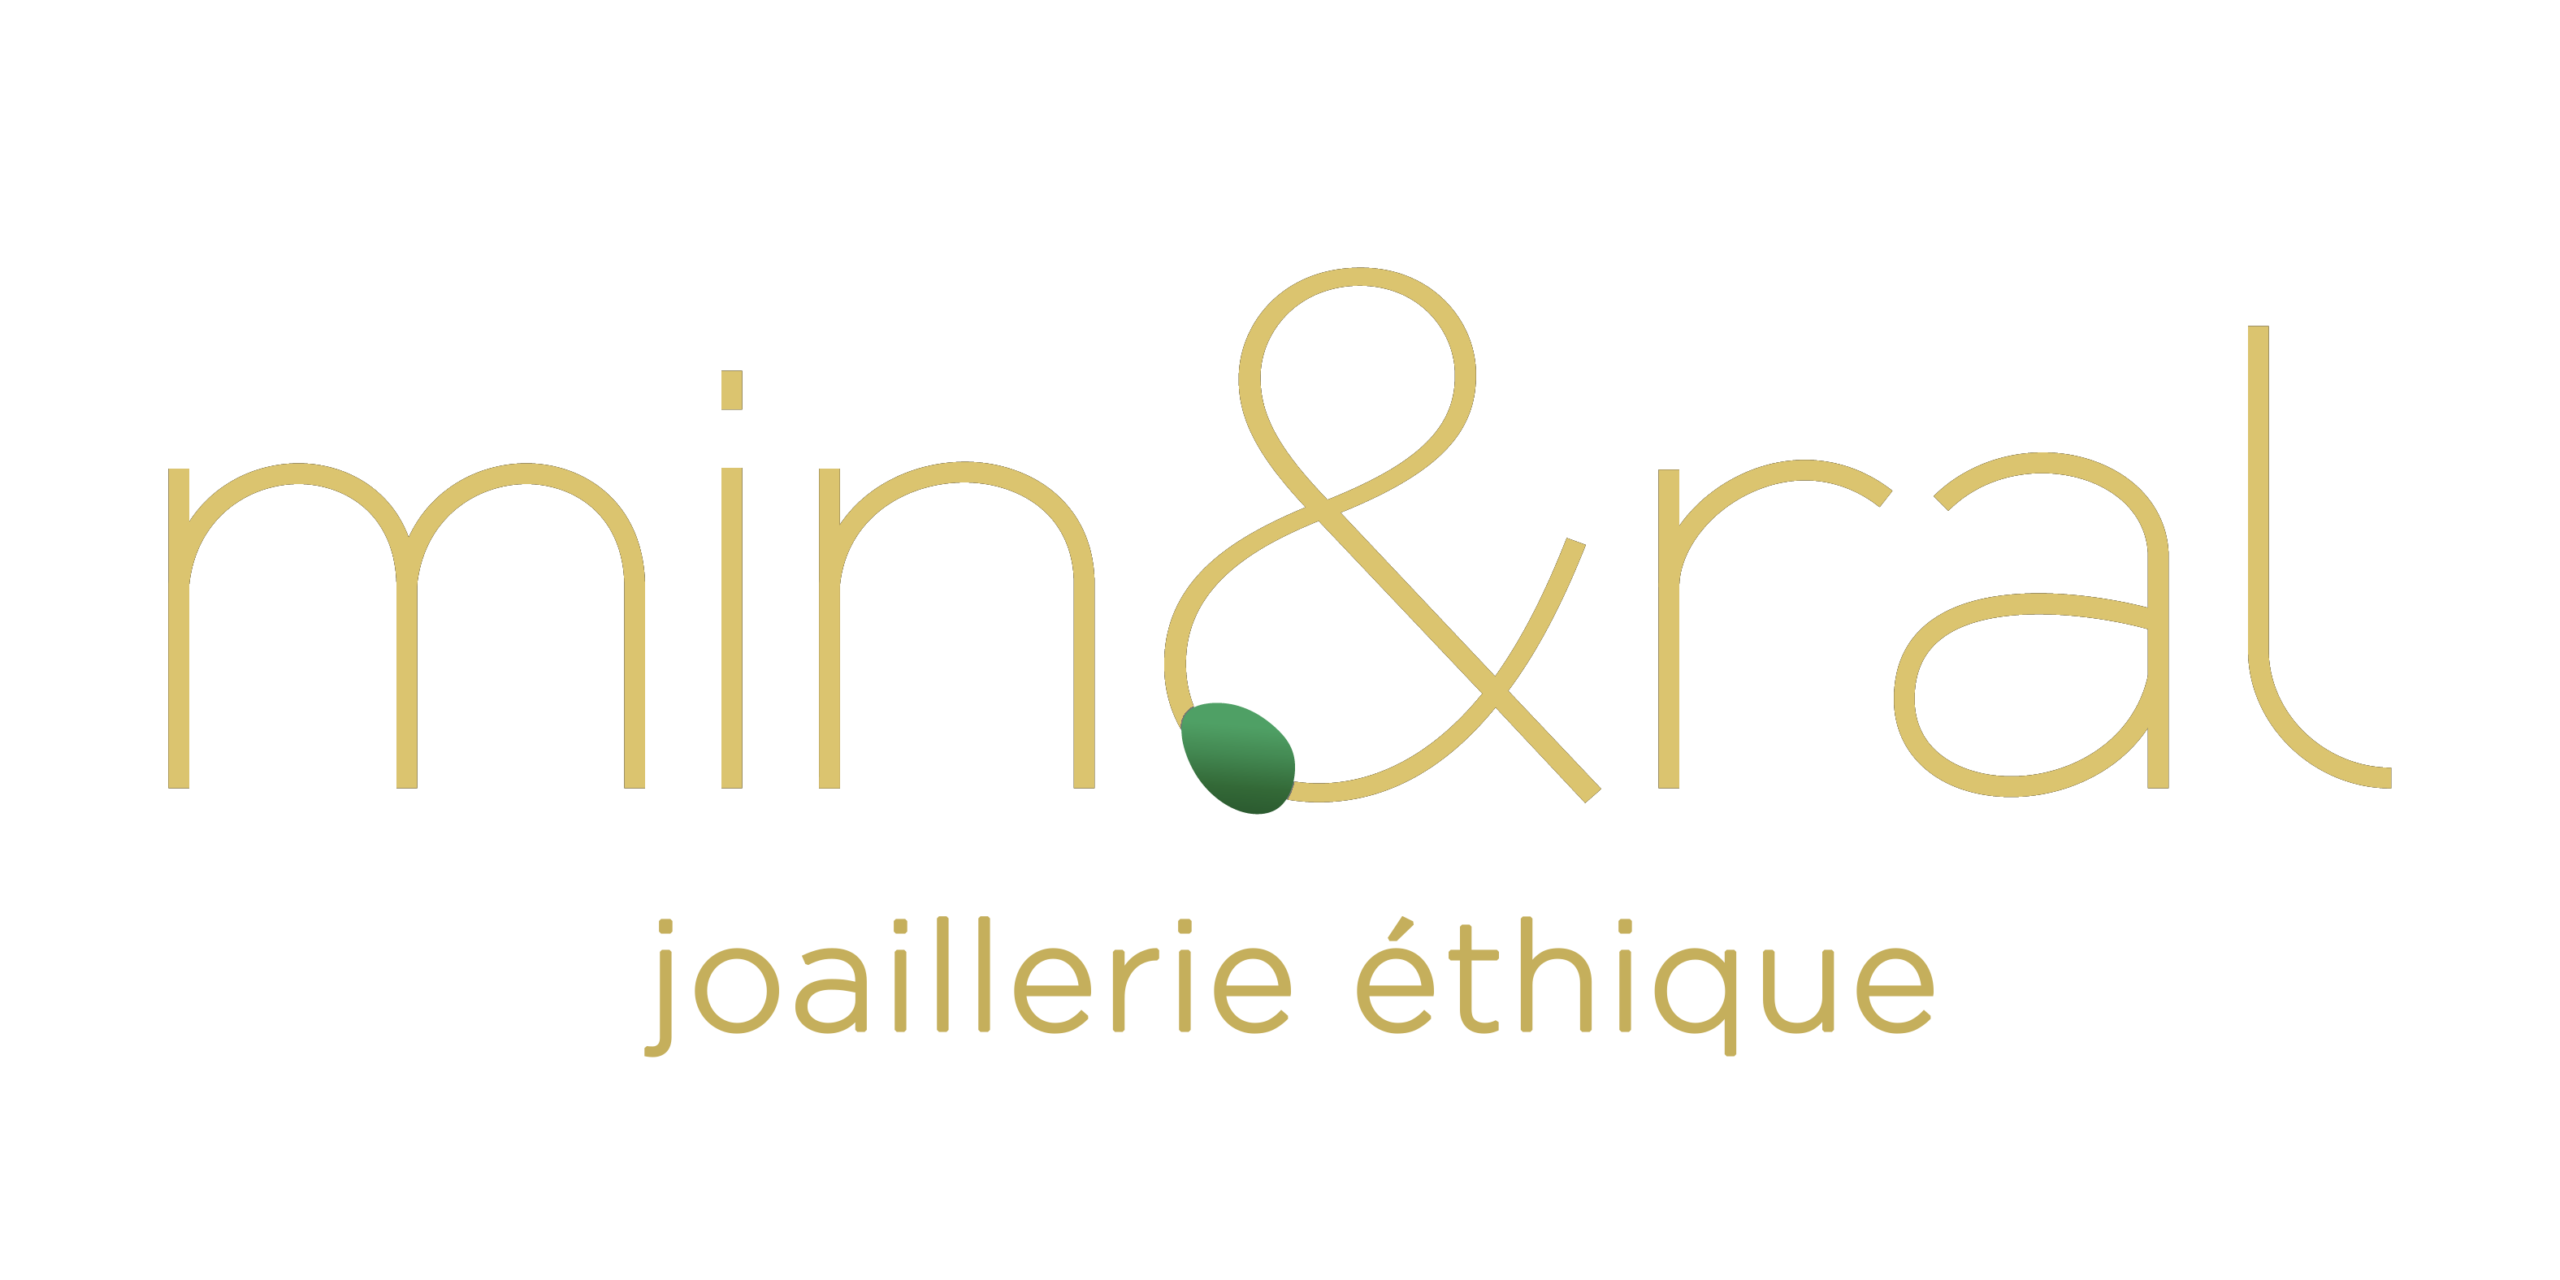 Mineral Joaillerie